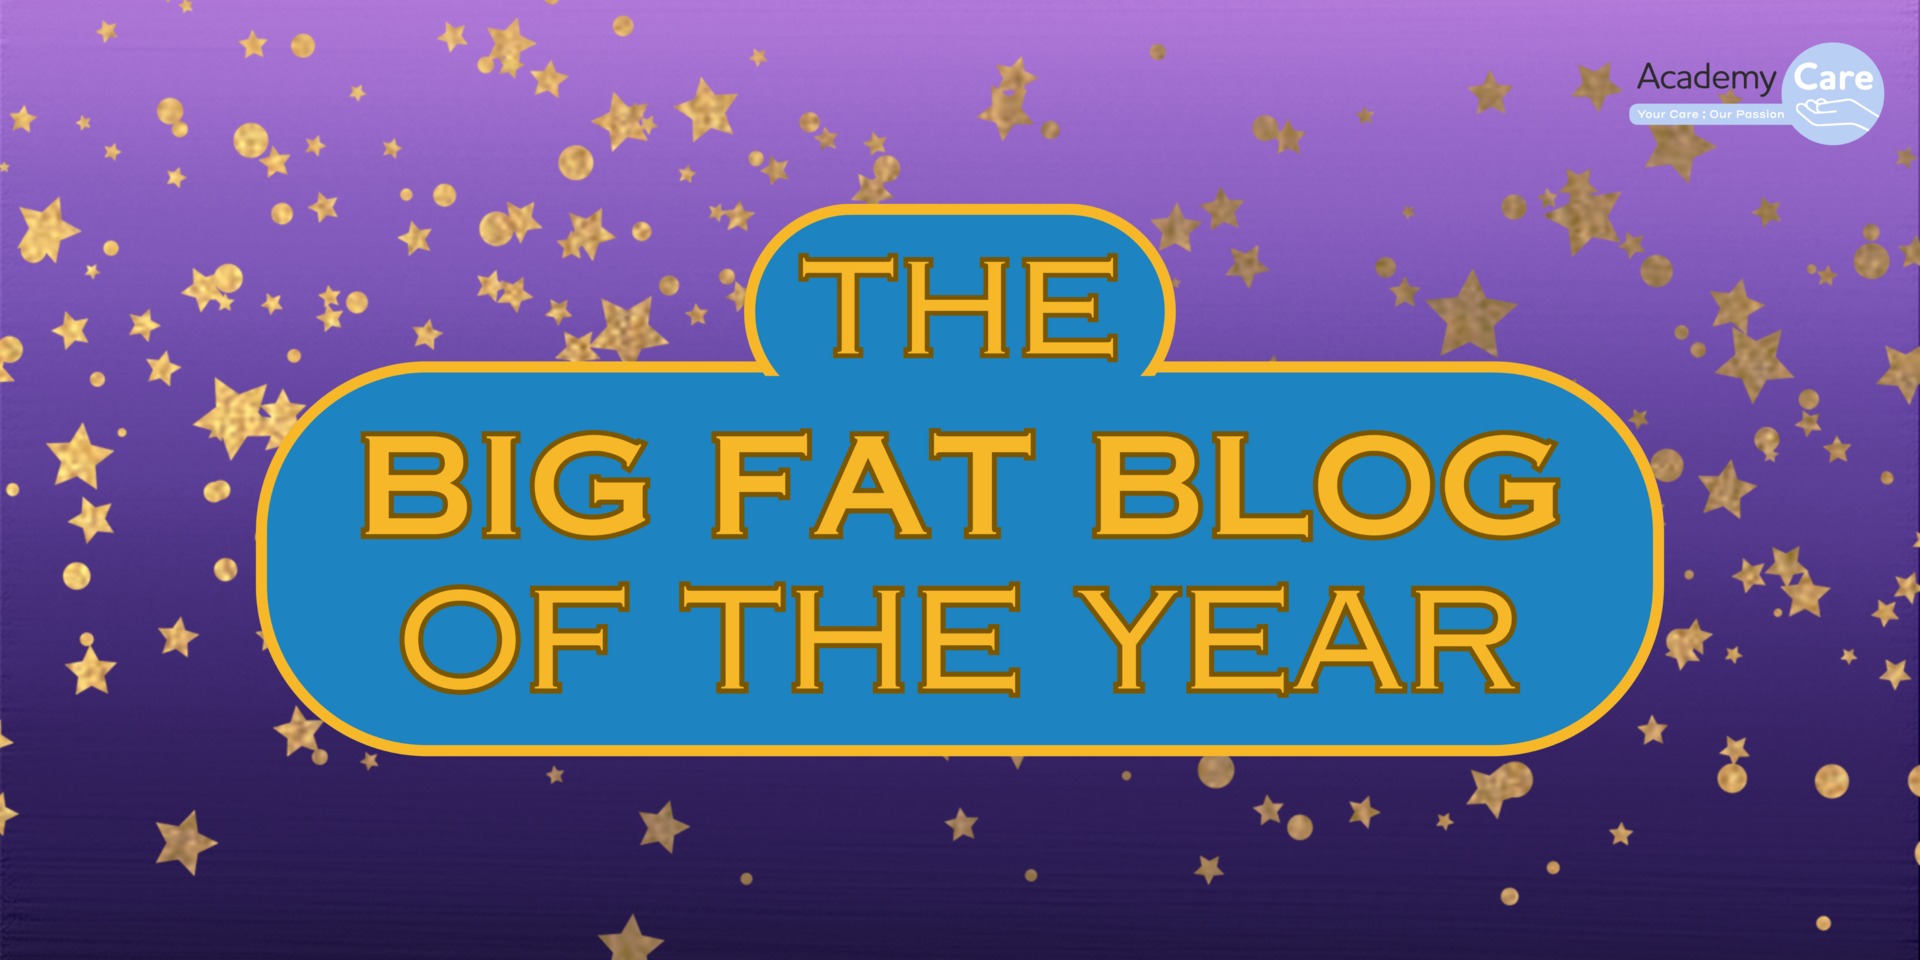 The Big Fat Blog of the Year